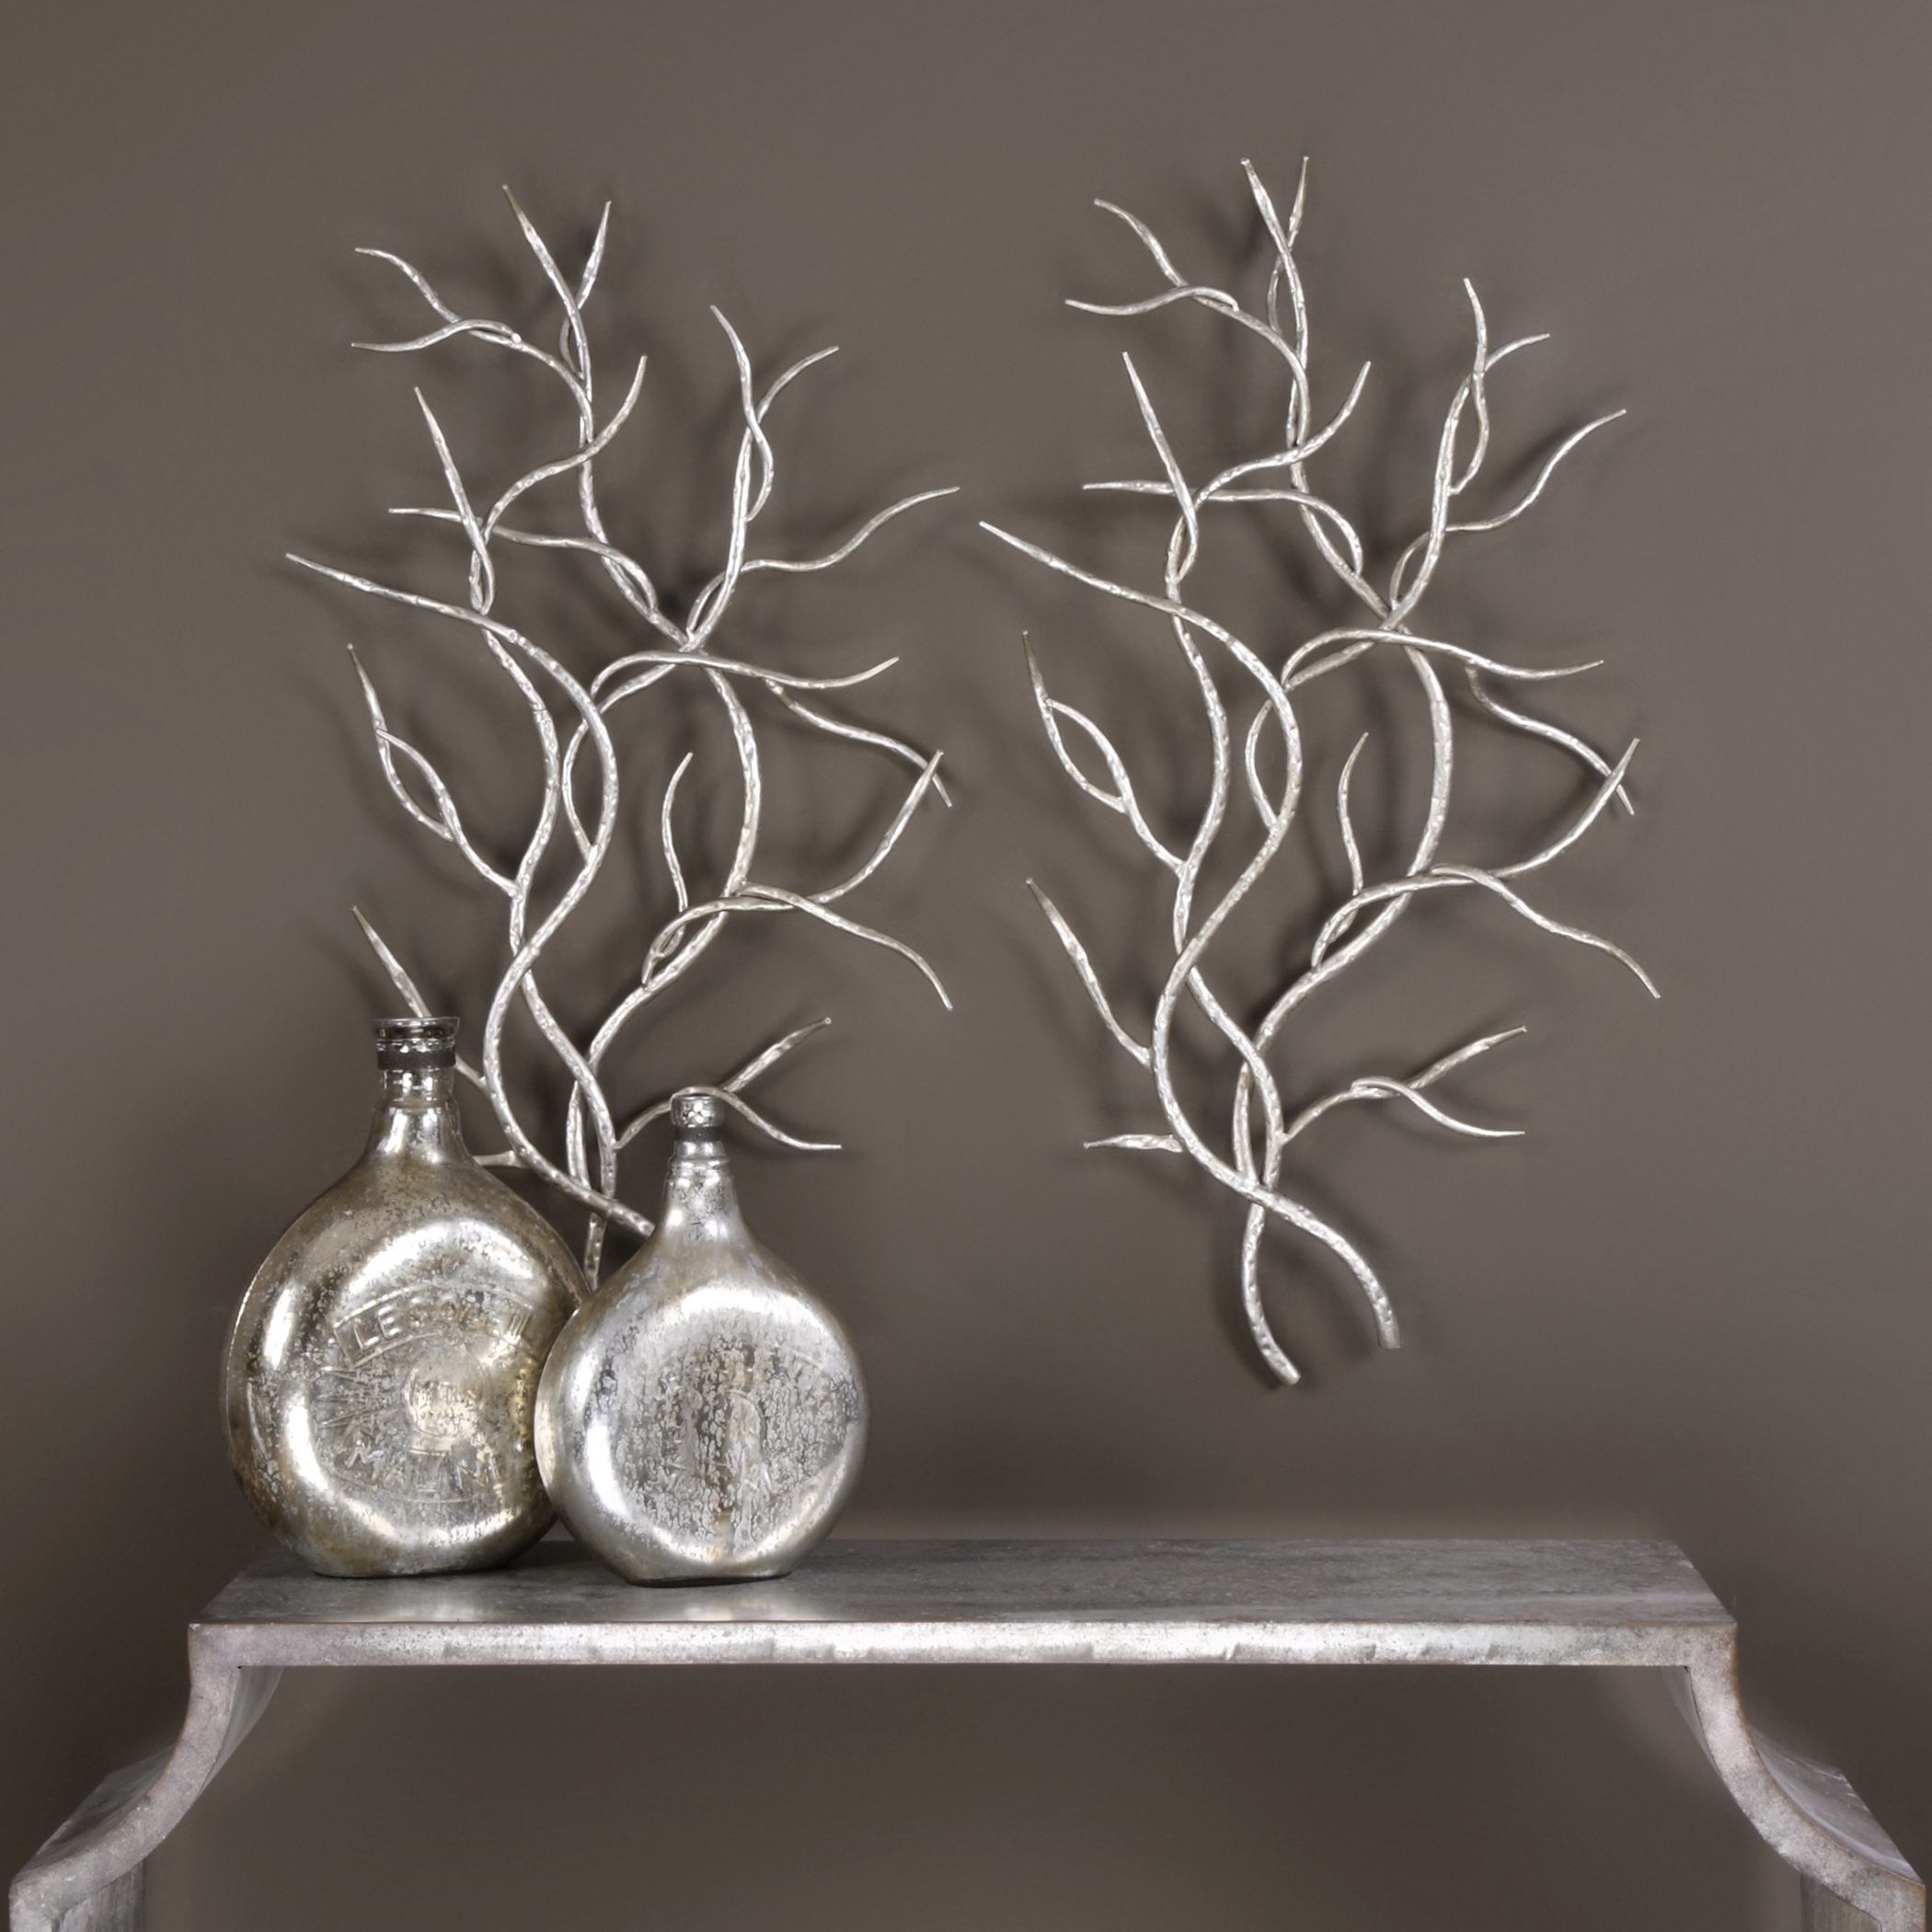 Silver Branches Wall Art S/2 - Image 1